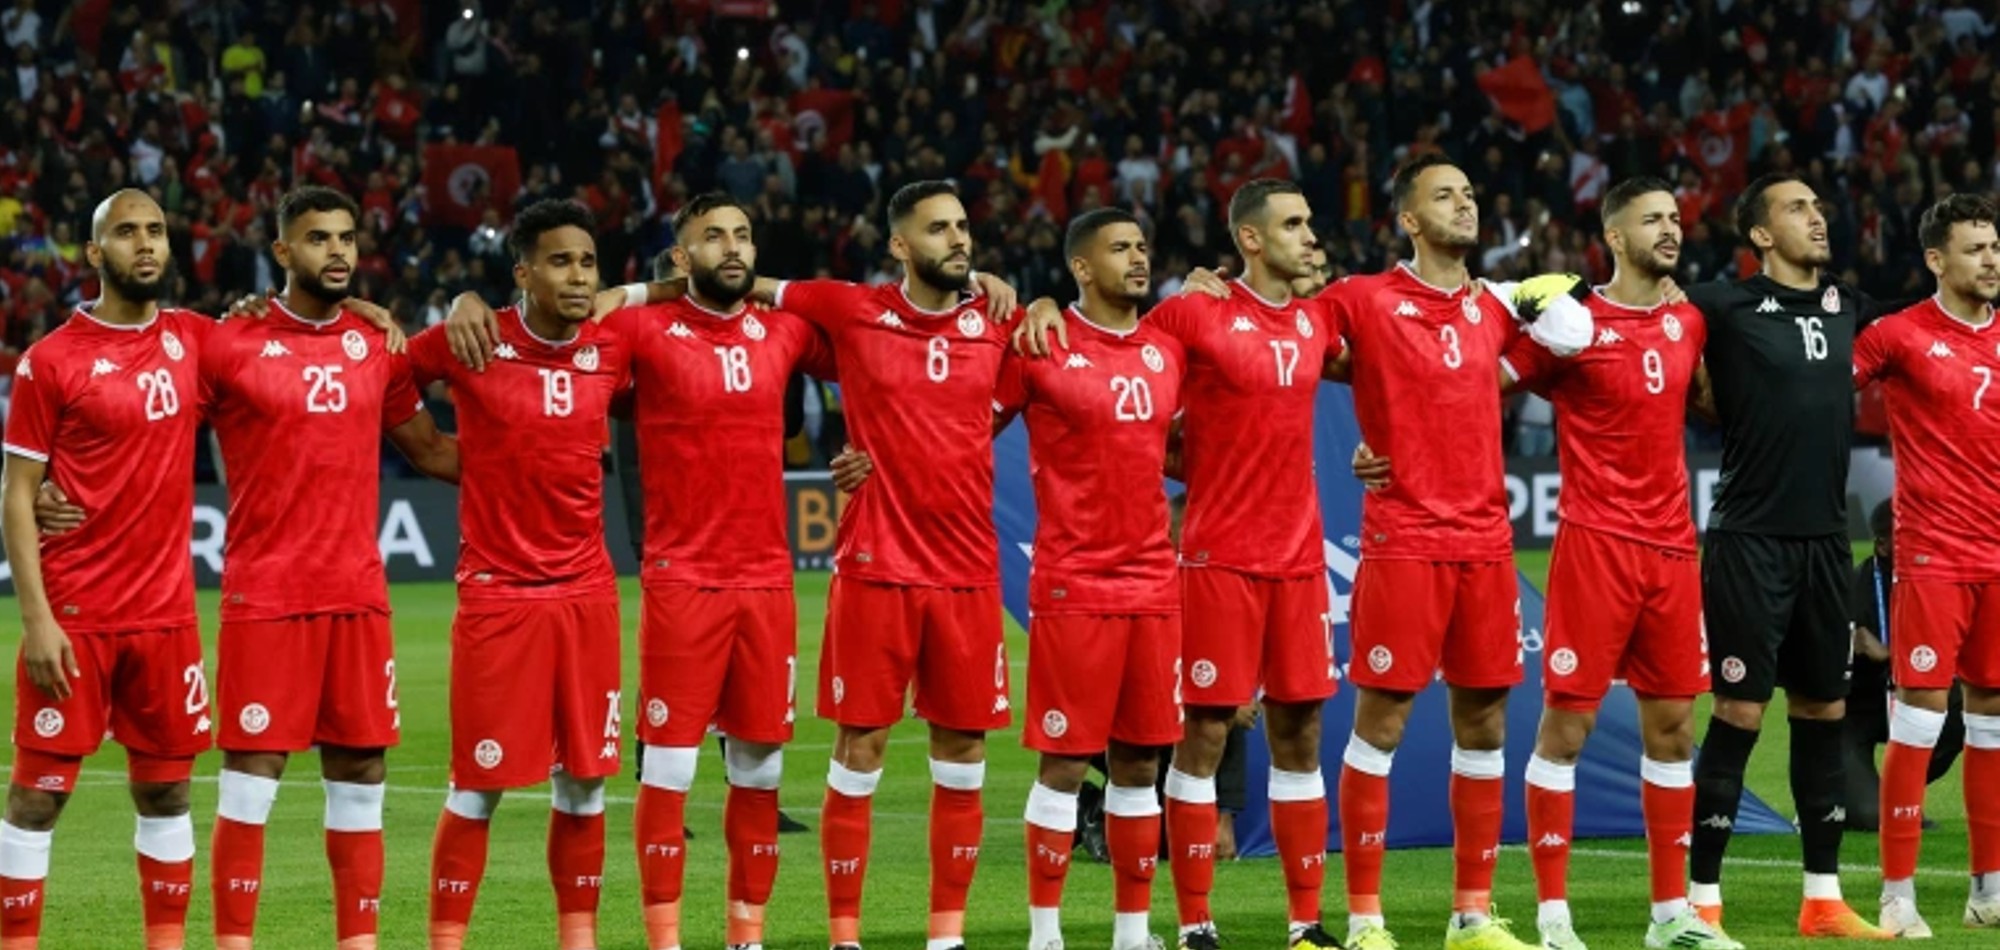 STARS OF QATAR 2022: Five stars to watch out for as Carthage Eagles of Tunisia hope to go beyond group stages